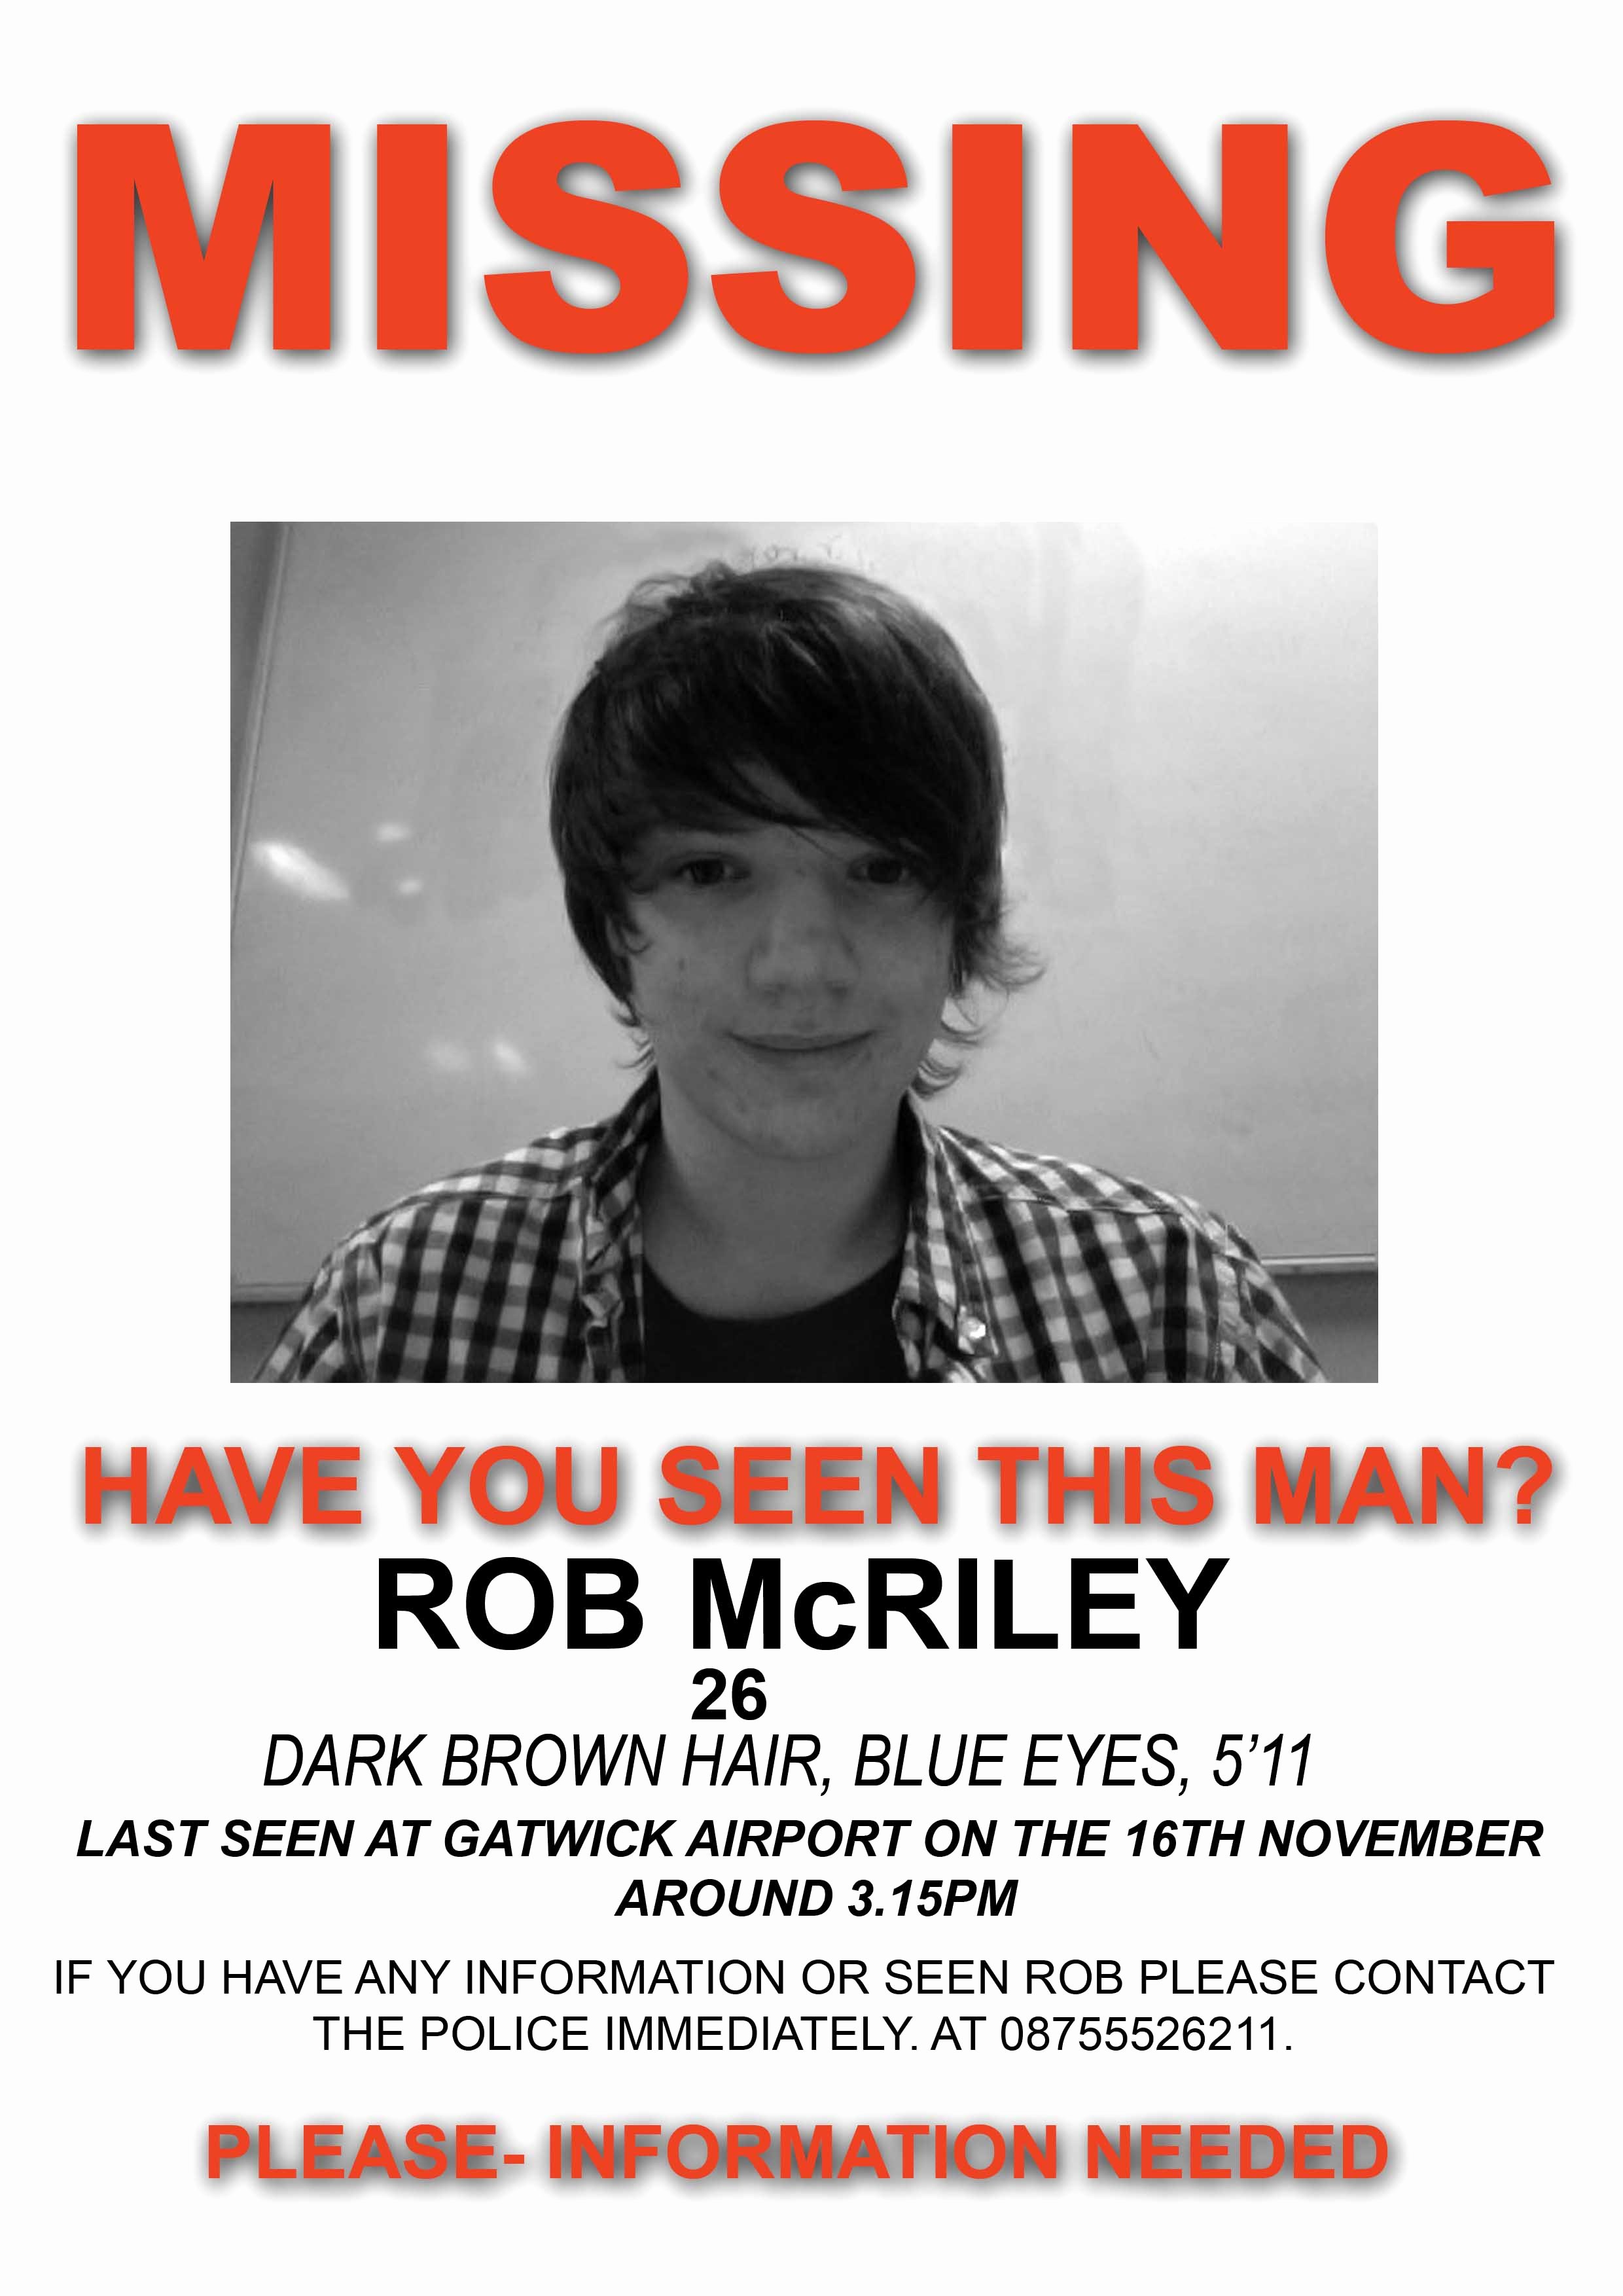 Missing Person Flyer Template Elegant Creating A Missing Poster for Rob Mcriley Post 1